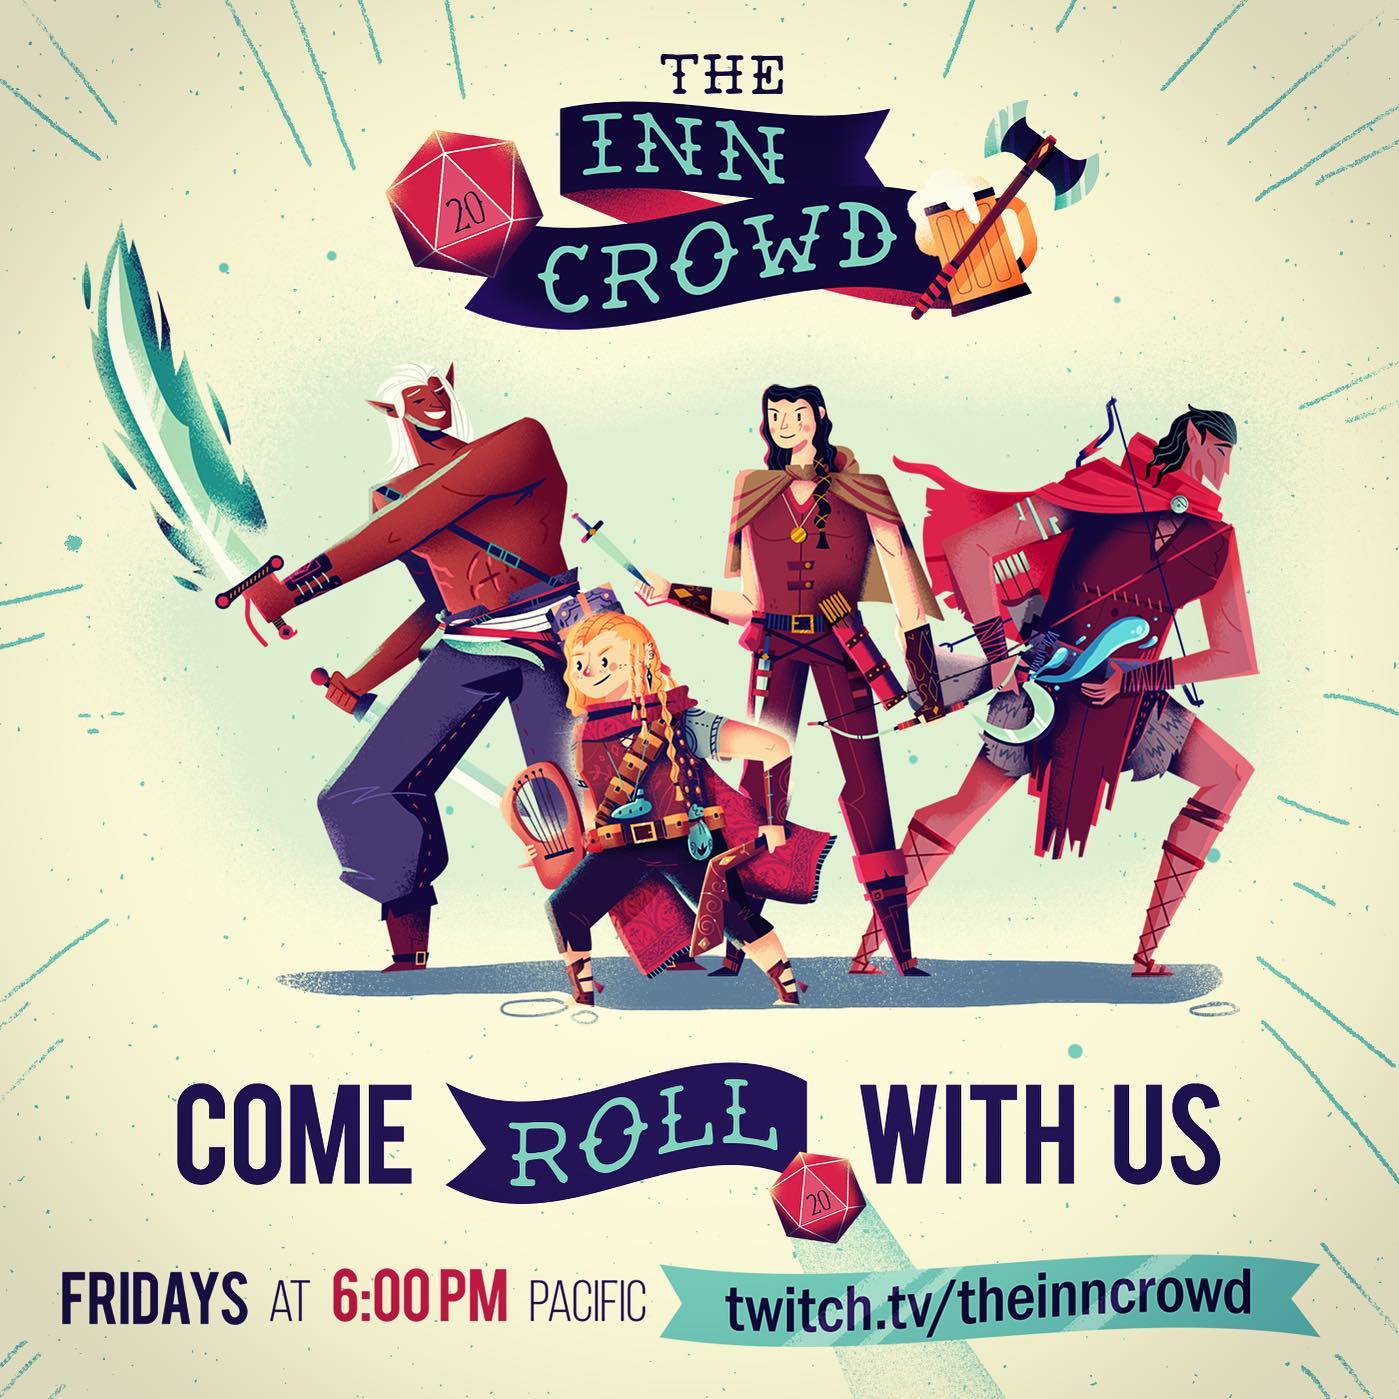 :::DnD game characters for The Inn Crowd twitch show:::.Two Elves, a halfling and a female human rogue are the characters for this nice twitch channel. I used to play D&D and gamebooks like Lone Wolf by Joe Denver, when I was a kid and I still get some game sessions 😀😀..#dnd #gamecharacterdesign #elf #rogue #halfling #dungeonsanddragonsart #dungeonsanddragons #boardgame #boardgameillustration #roll #dm #die #sounasart #sounas #εικονογράφηση #boardgameart #tunnelsandtrolls